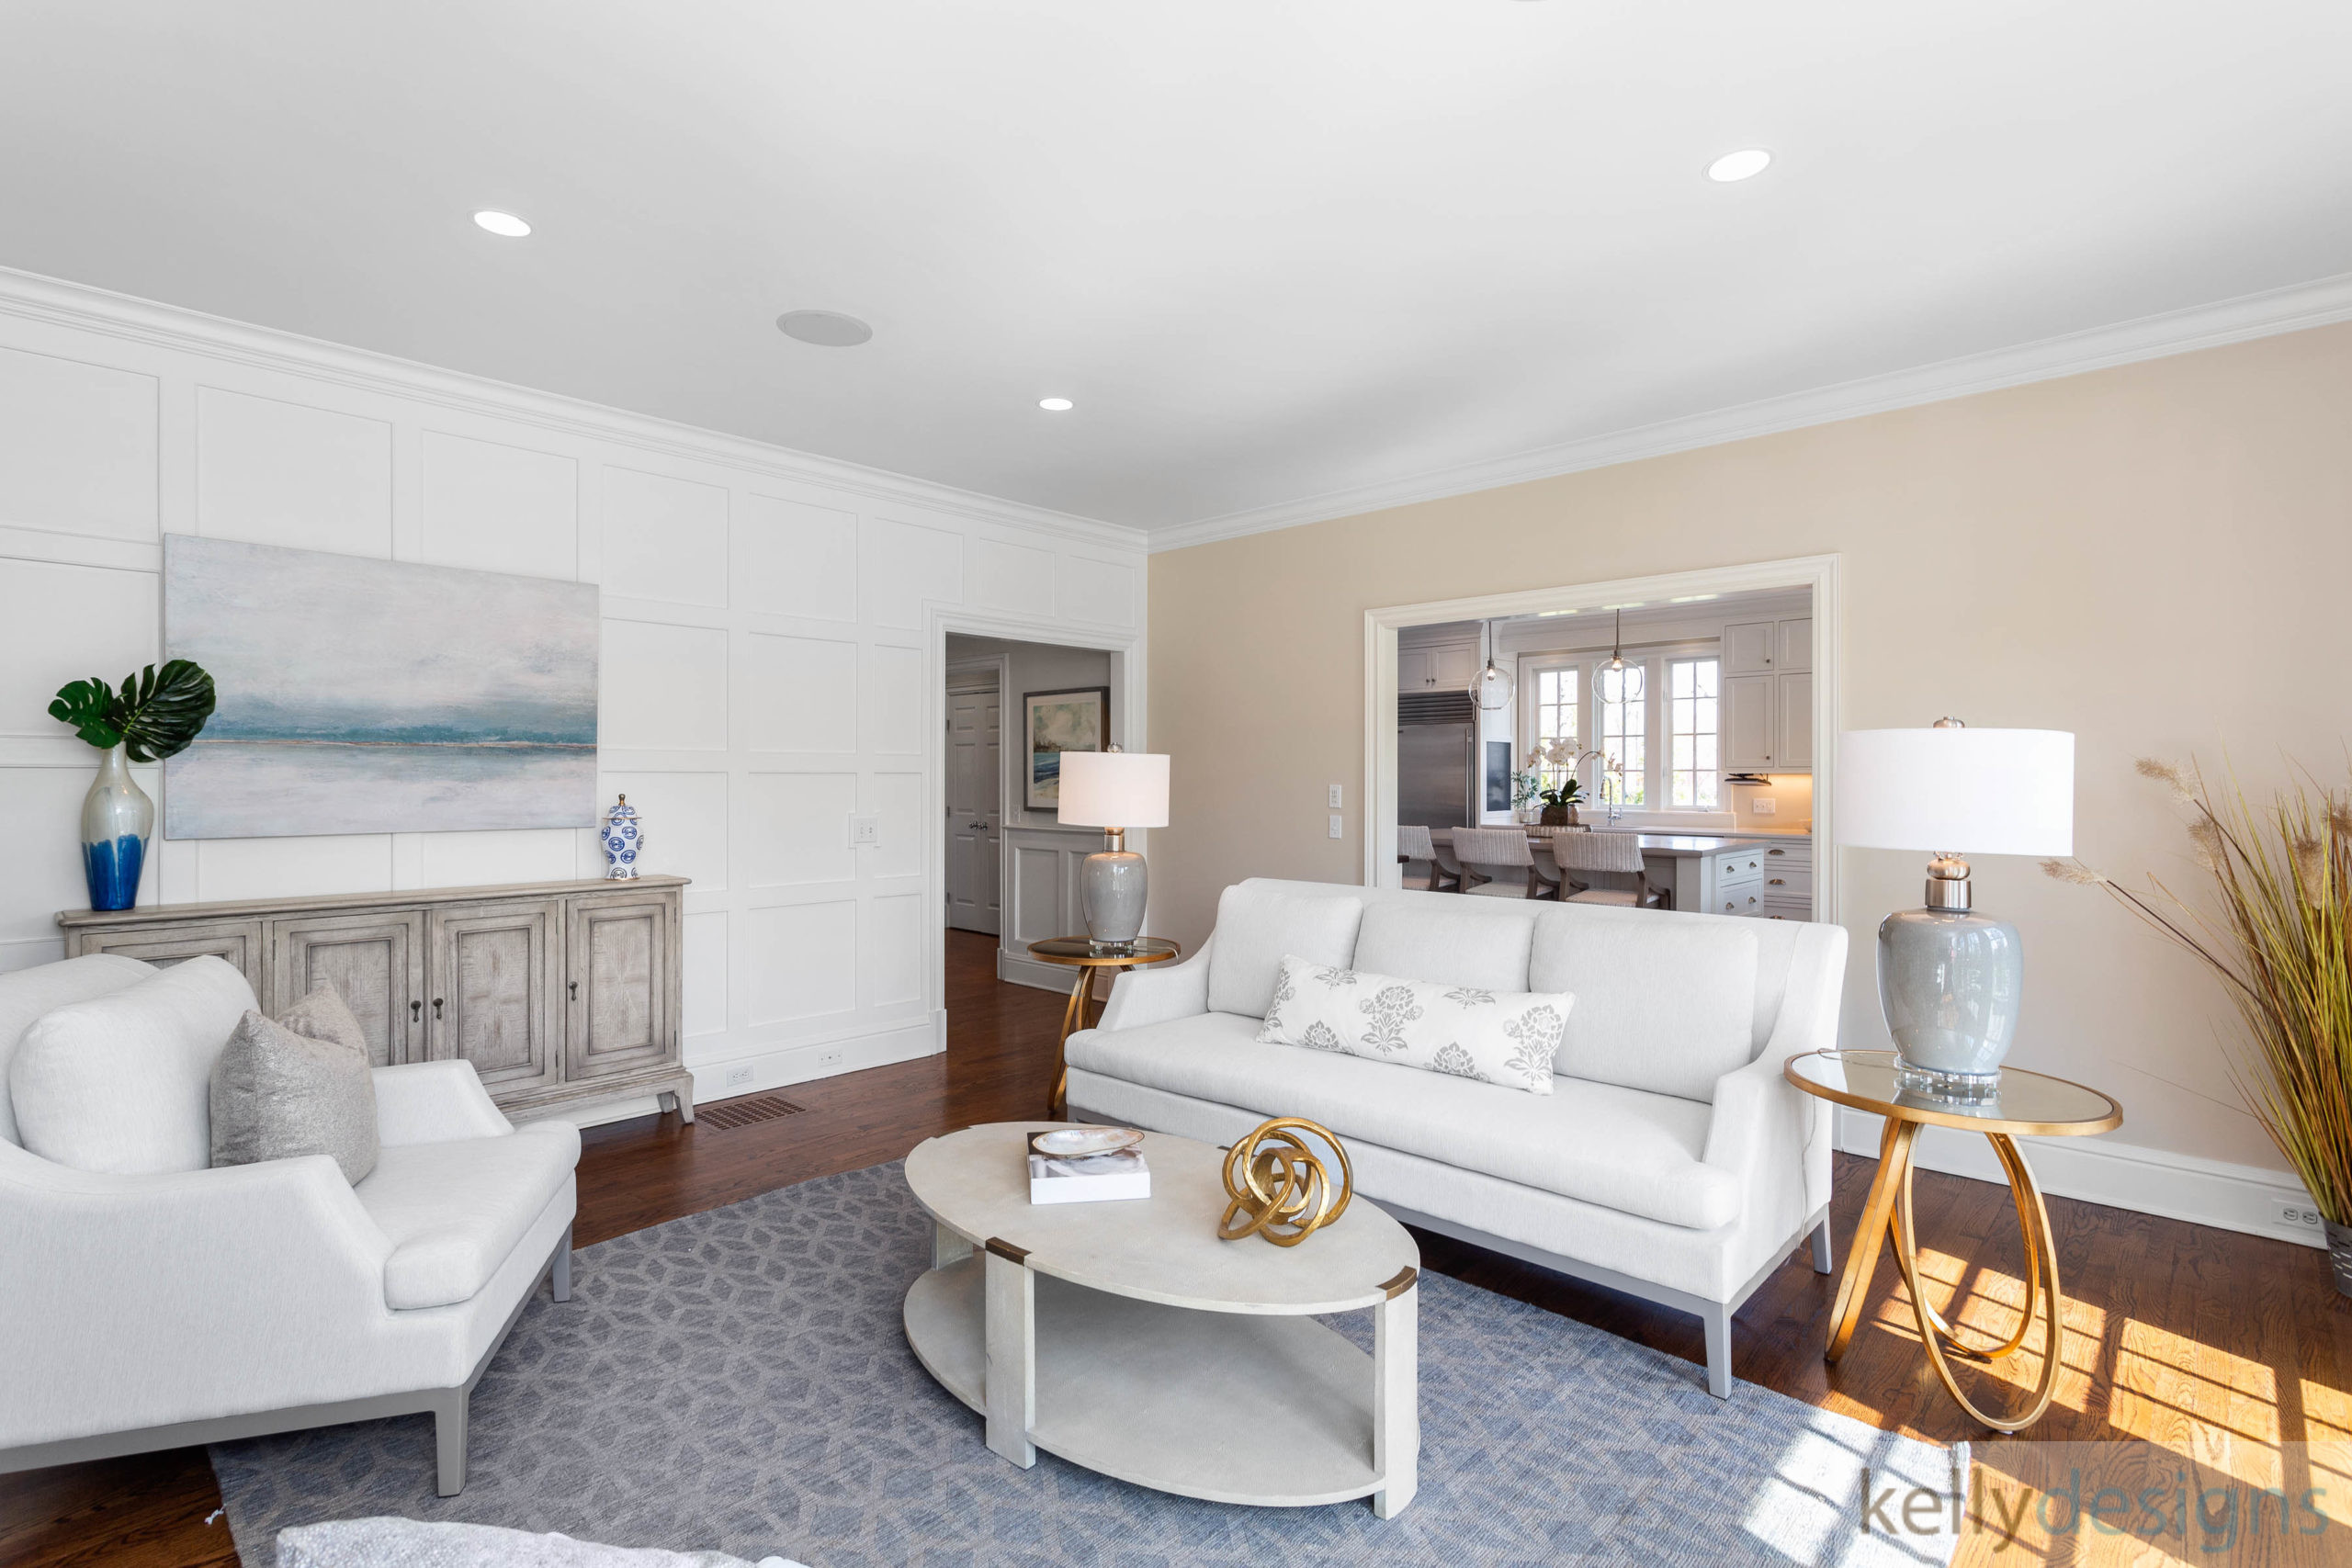 Pretty on Penfield - Home Staging by kellydeisgns